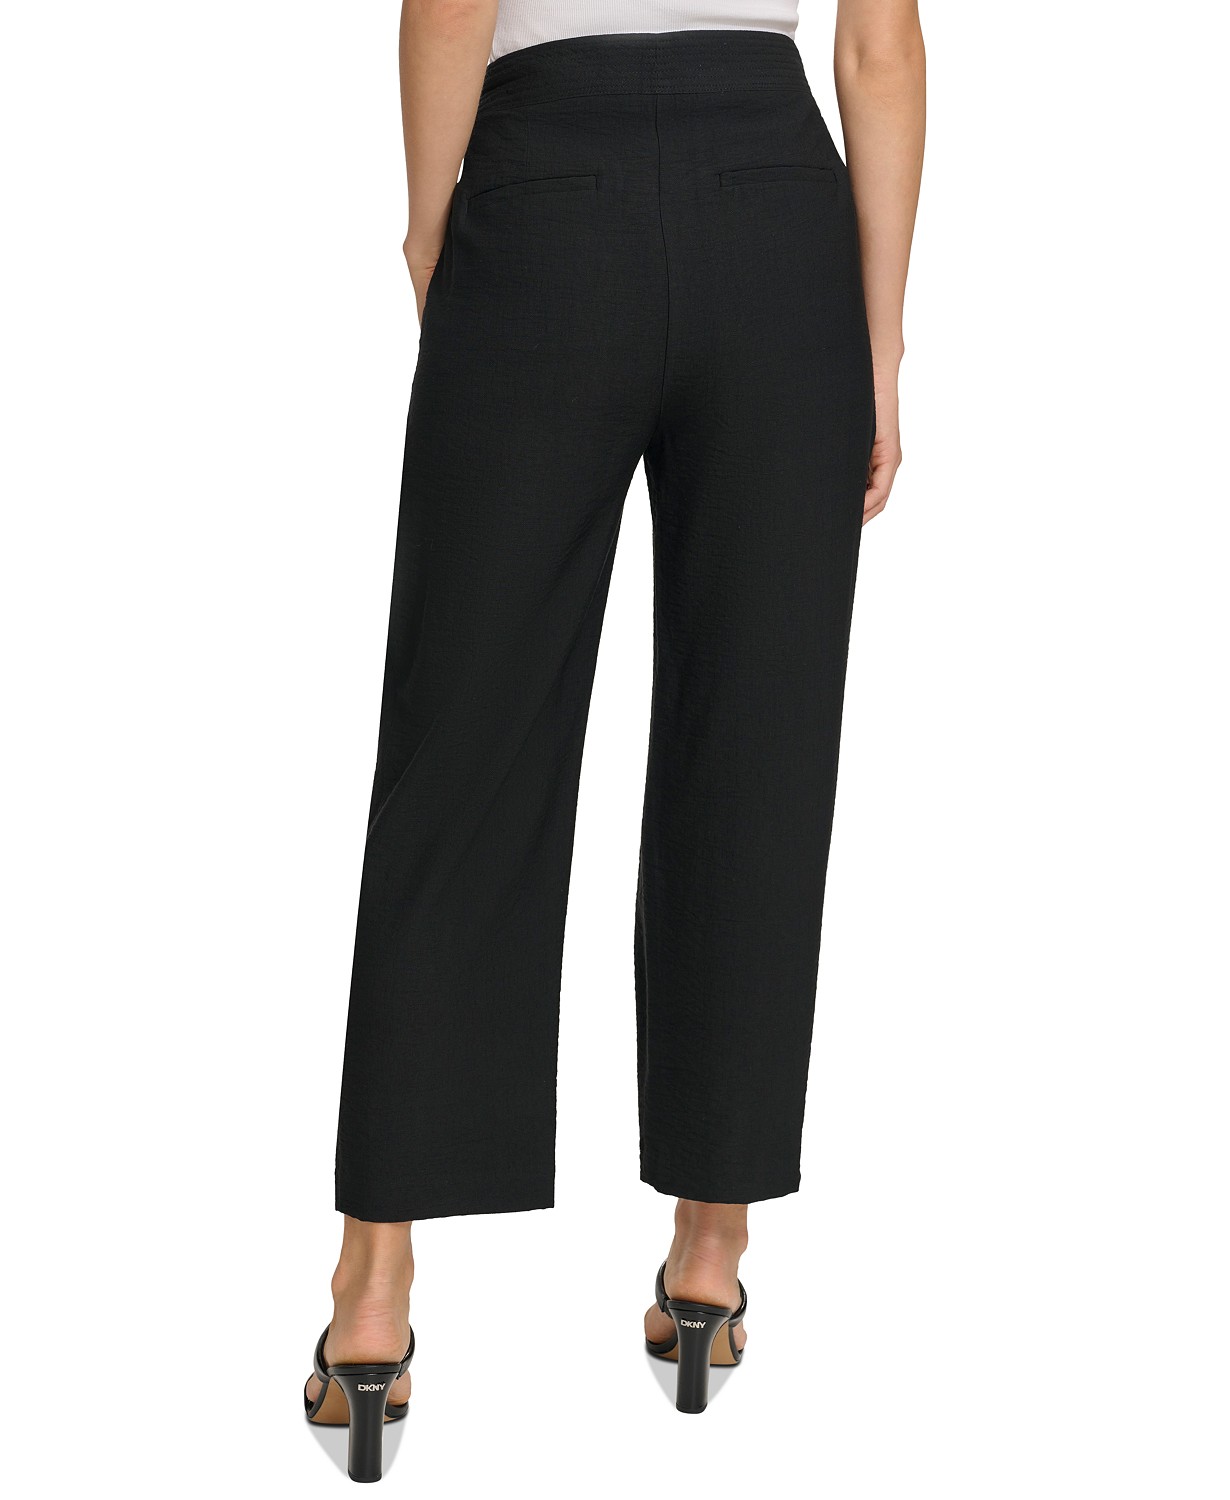 DKNY Womens Belted Pleated Pants